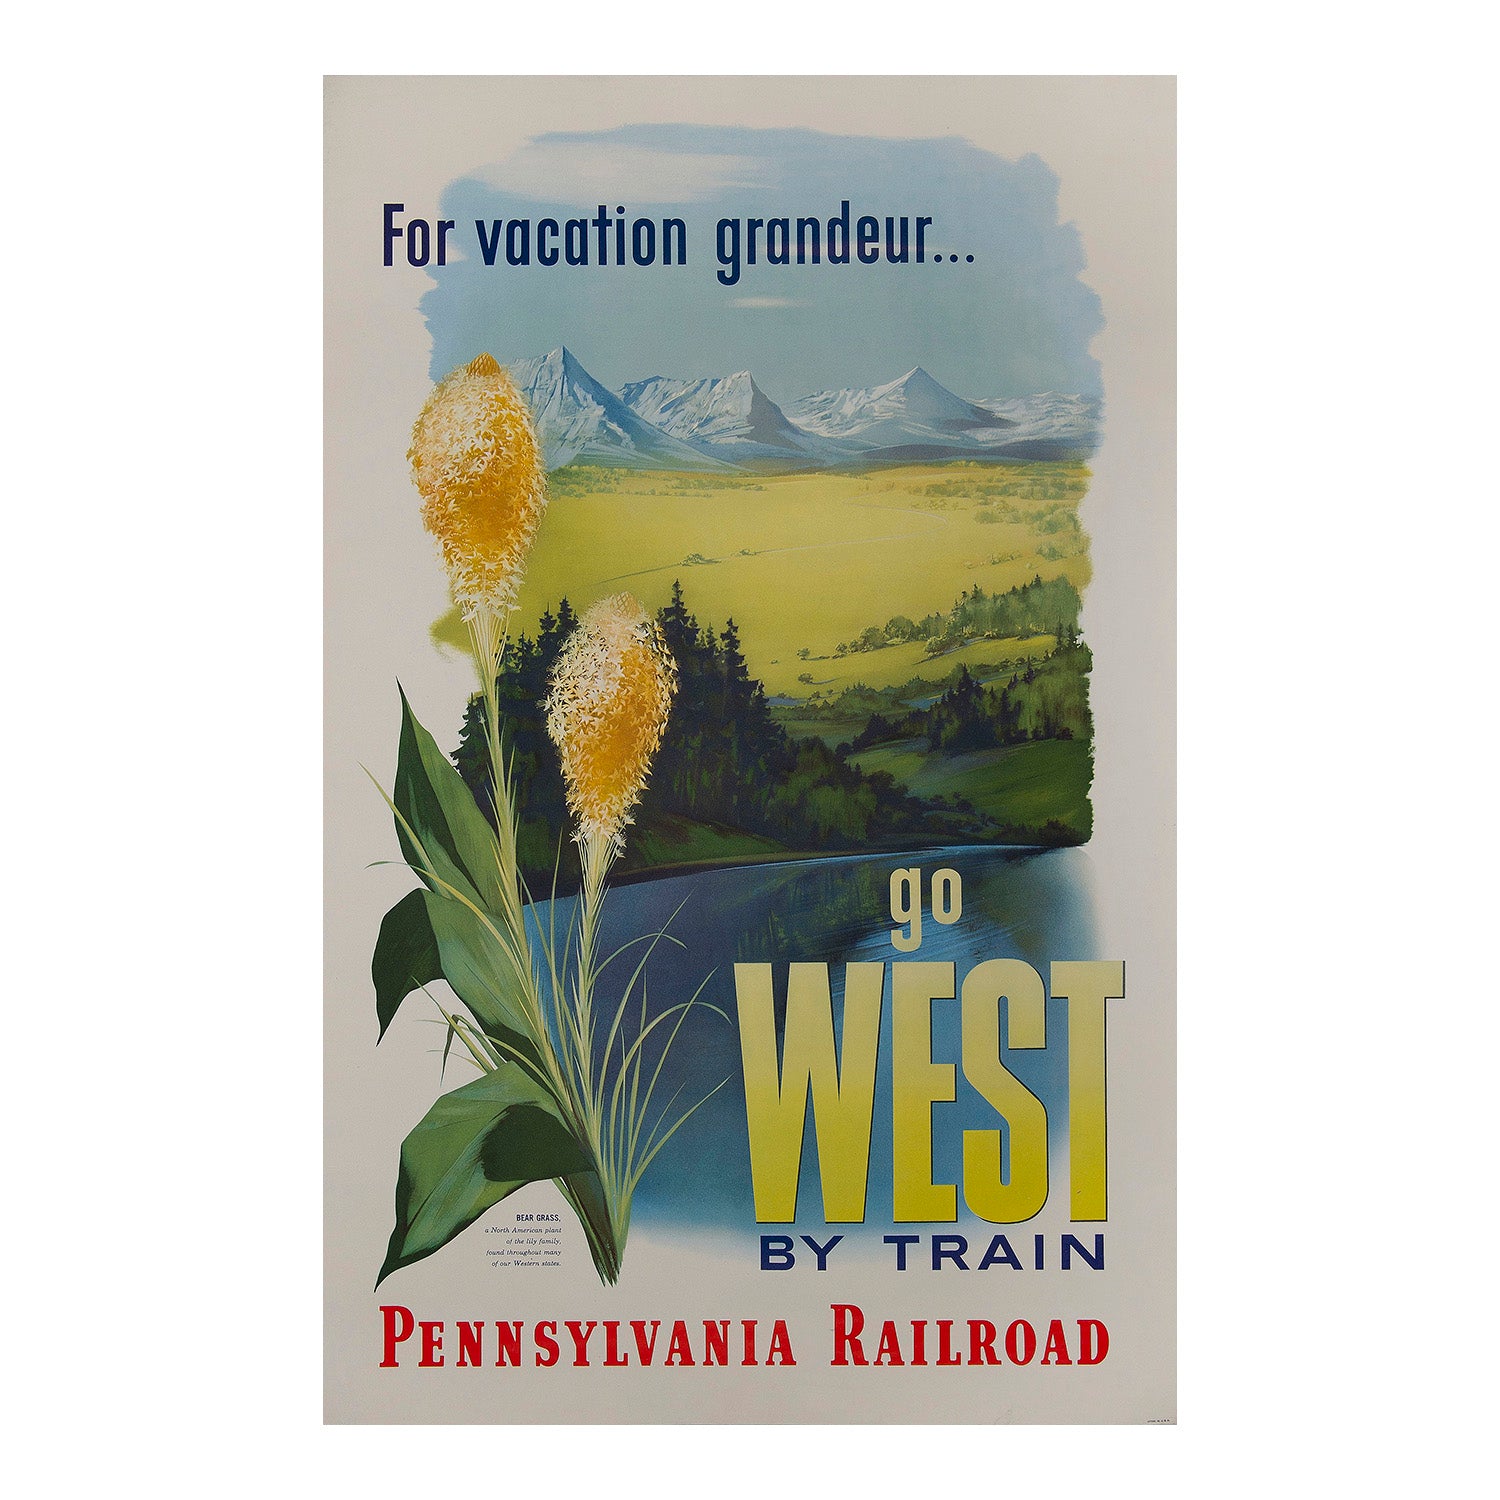 Original poster for the Pennsylvania Railroad featuring an enticing view of the American West with snow-capped mountains in the distance and bear grass in the foreground